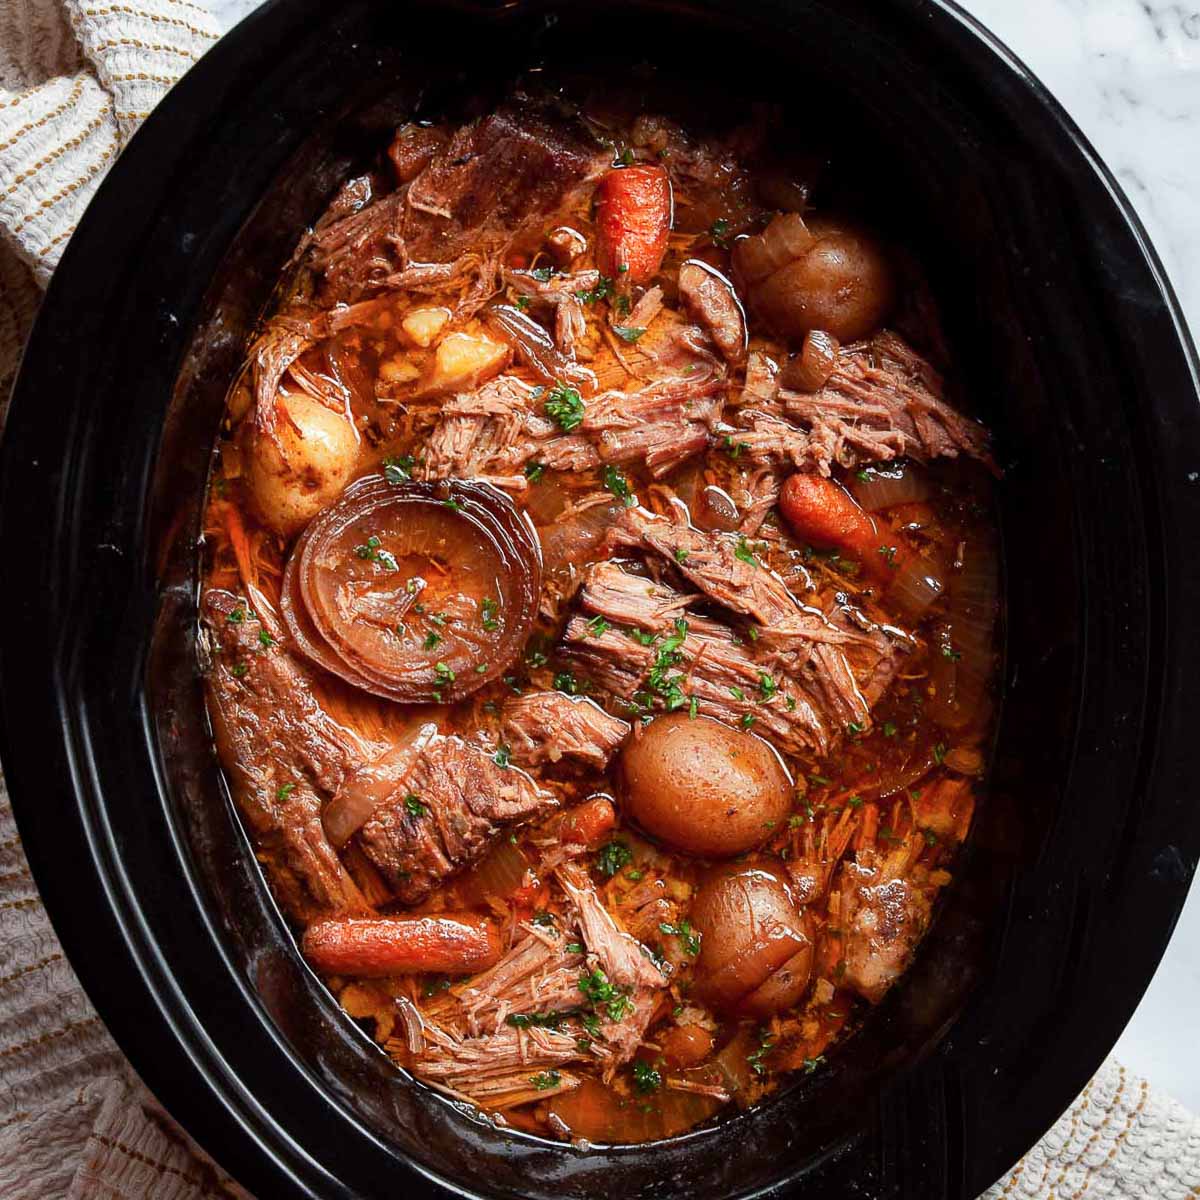 How to use a slow cooker- 10 top tips